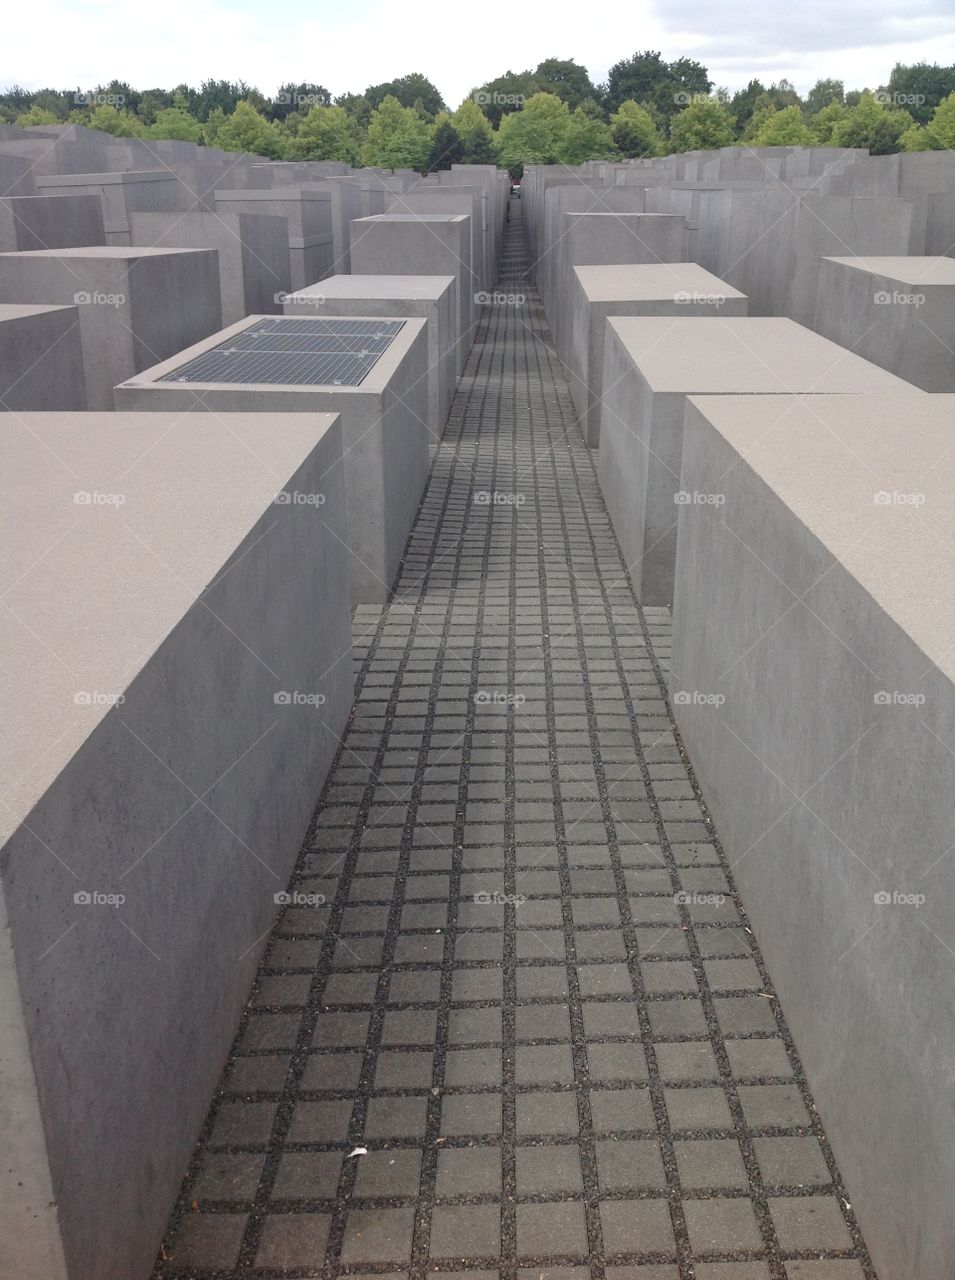 Berlin Holocaust Memorial. Controversial memorial for the victims of the German Holocaust in WWII